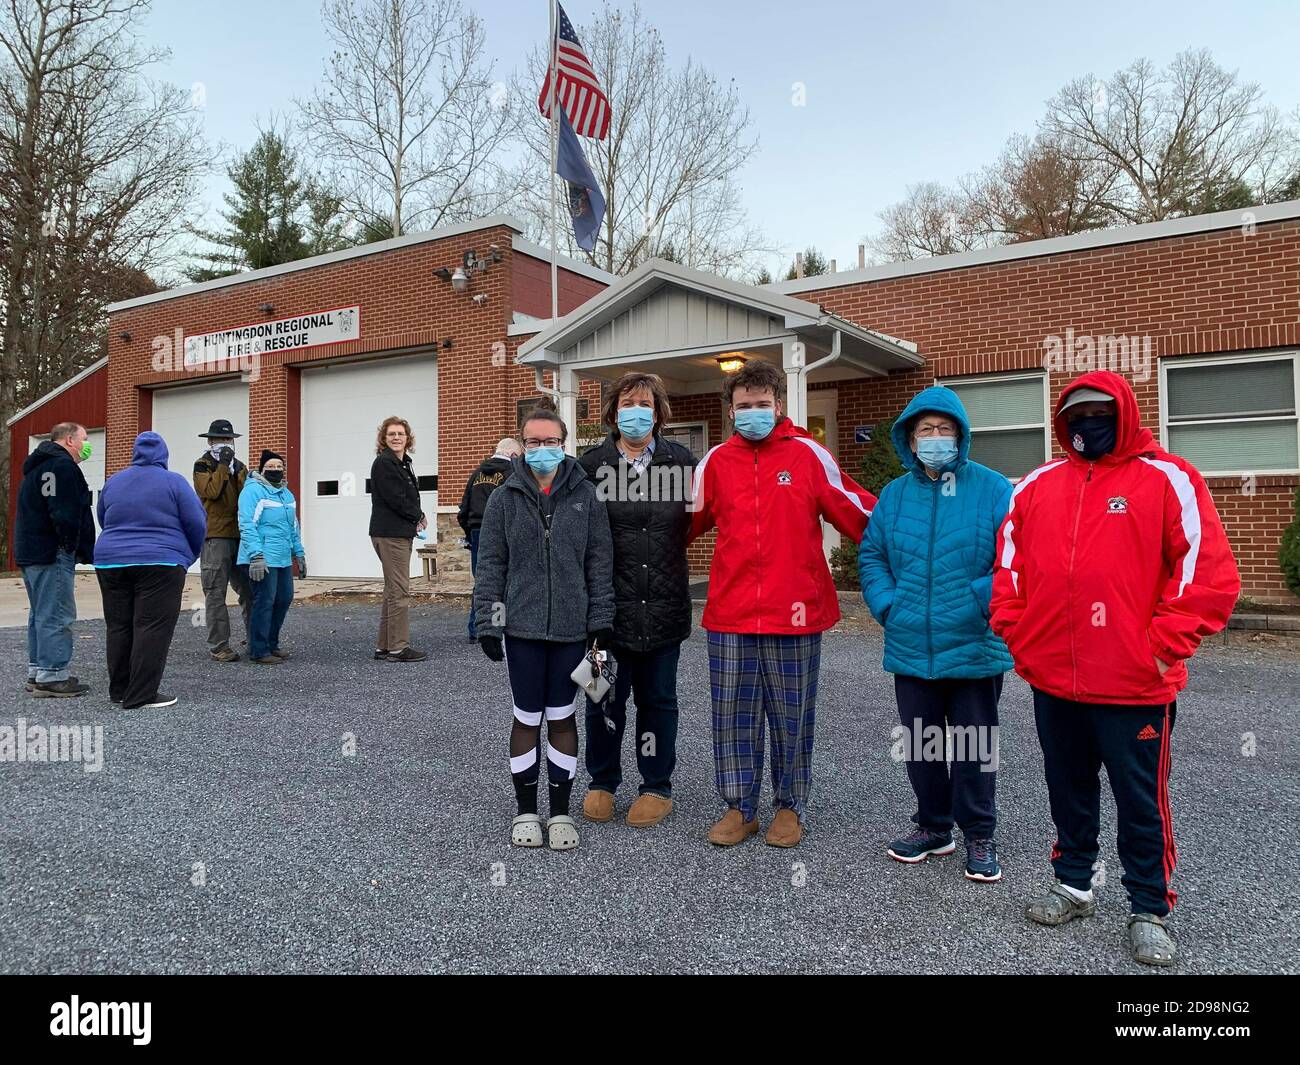 Oneida Township, Pennsylvania, USA. 3rd Nov, 2020. A three generation family arrived before the polls open, including two first-time voters, to cast their ballots together. Grandmother Mary Dempsey (second from right) is joined by Phil and Mary Jane Hawkins and new voters Brady and Jordan Hawkins. Credit: Sue Dorfman/ZUMA Wire/Alamy Live News Stock Photo